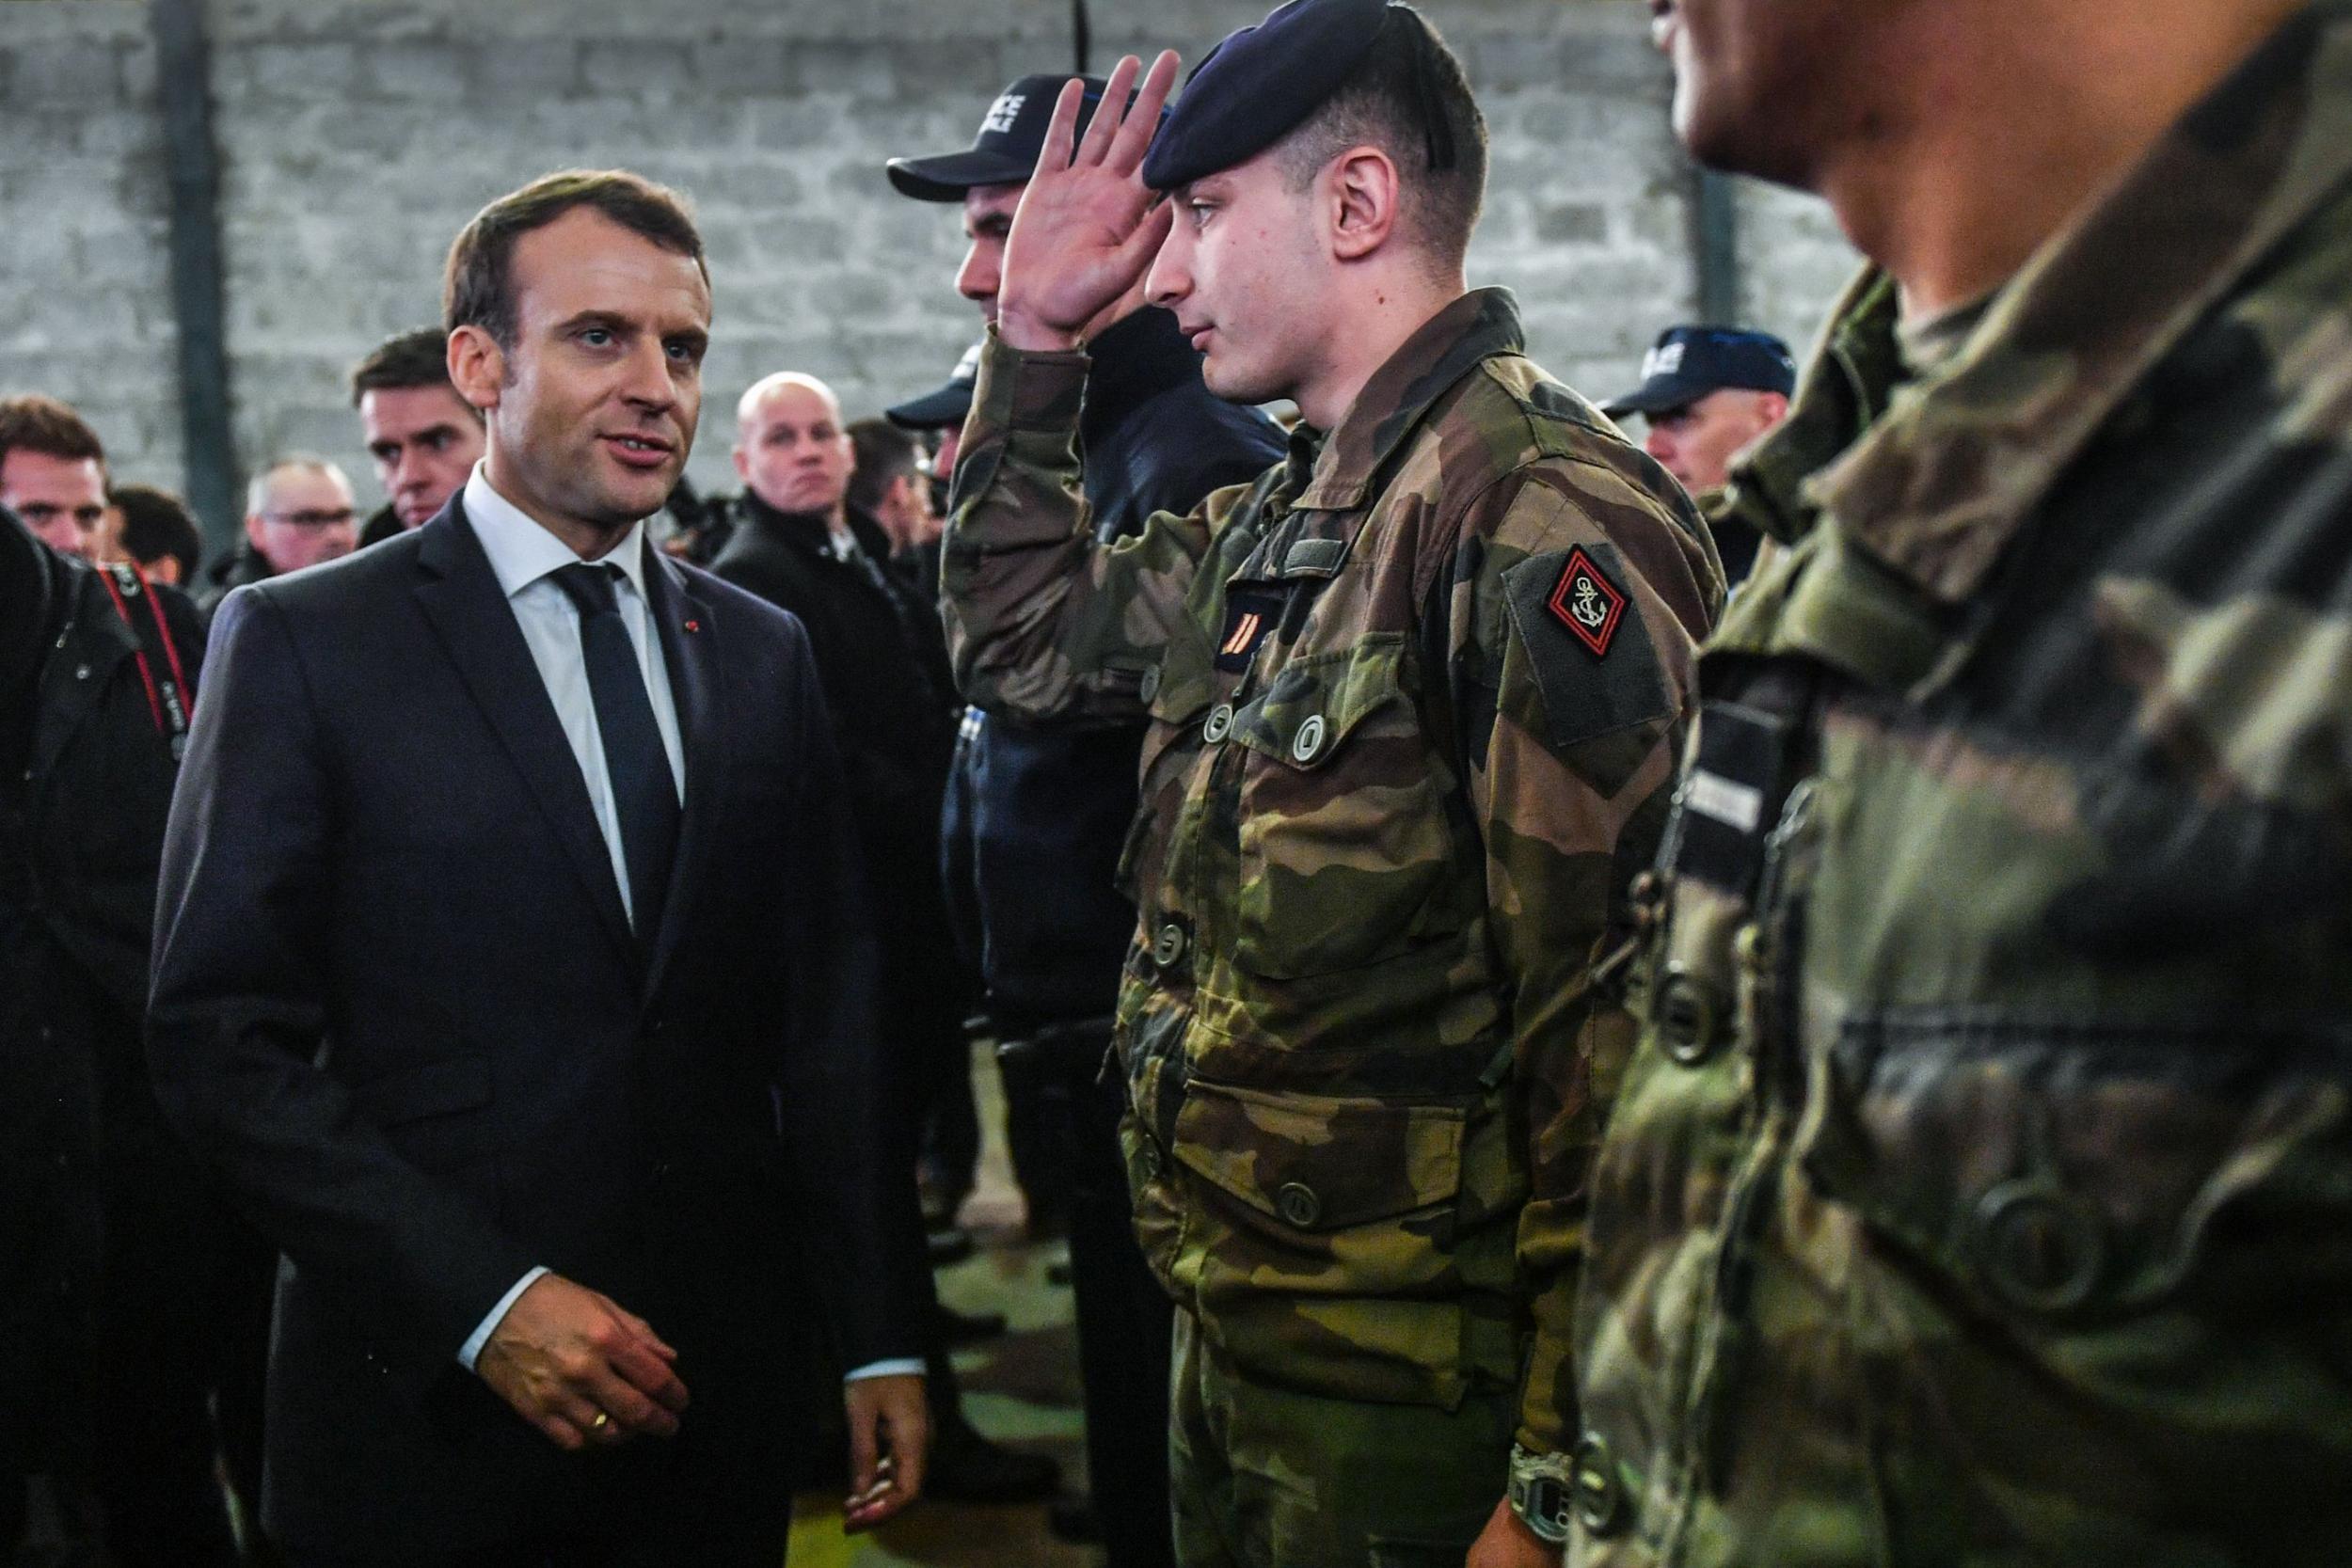 French President Emmanuel Macron is the first modern French president not to do national service himself